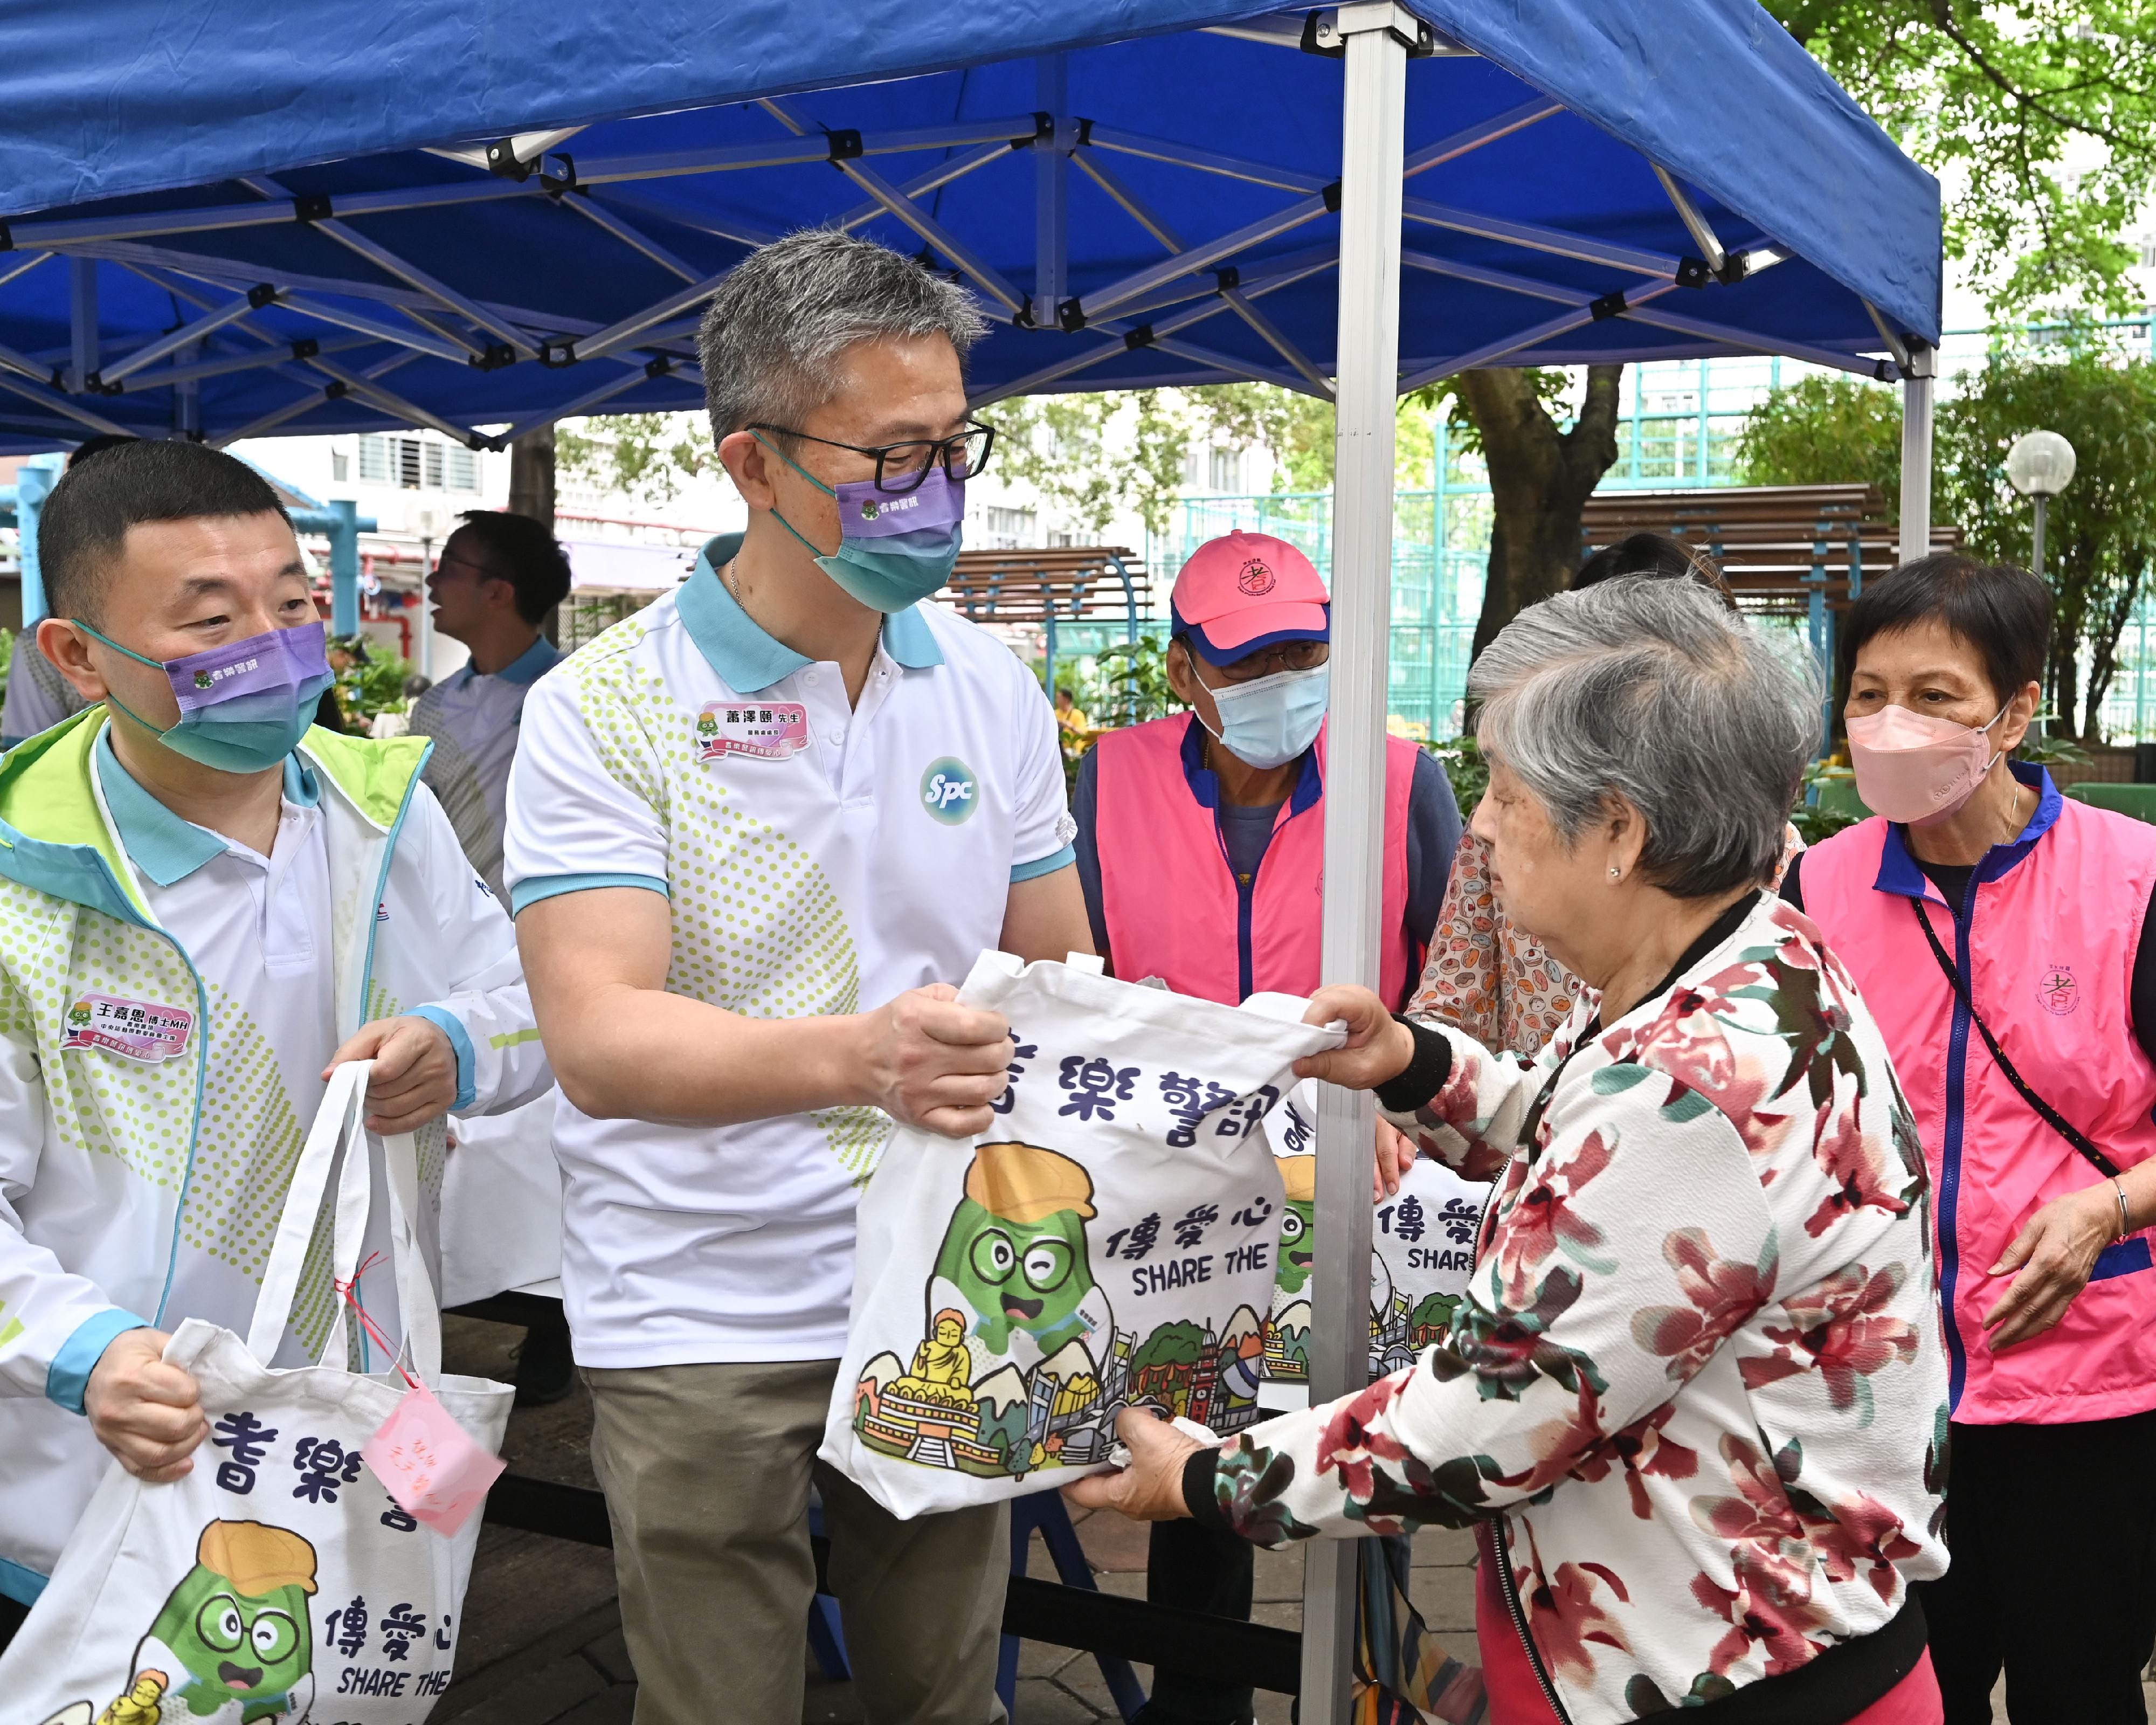 Senior Police Call (SPC) launched the “SPC Share the Love” today (May 13). Photo shows the Commissioner of Police, Mr Siu Chak-yee (second left), distributing a blessing bag to a senior citizen.